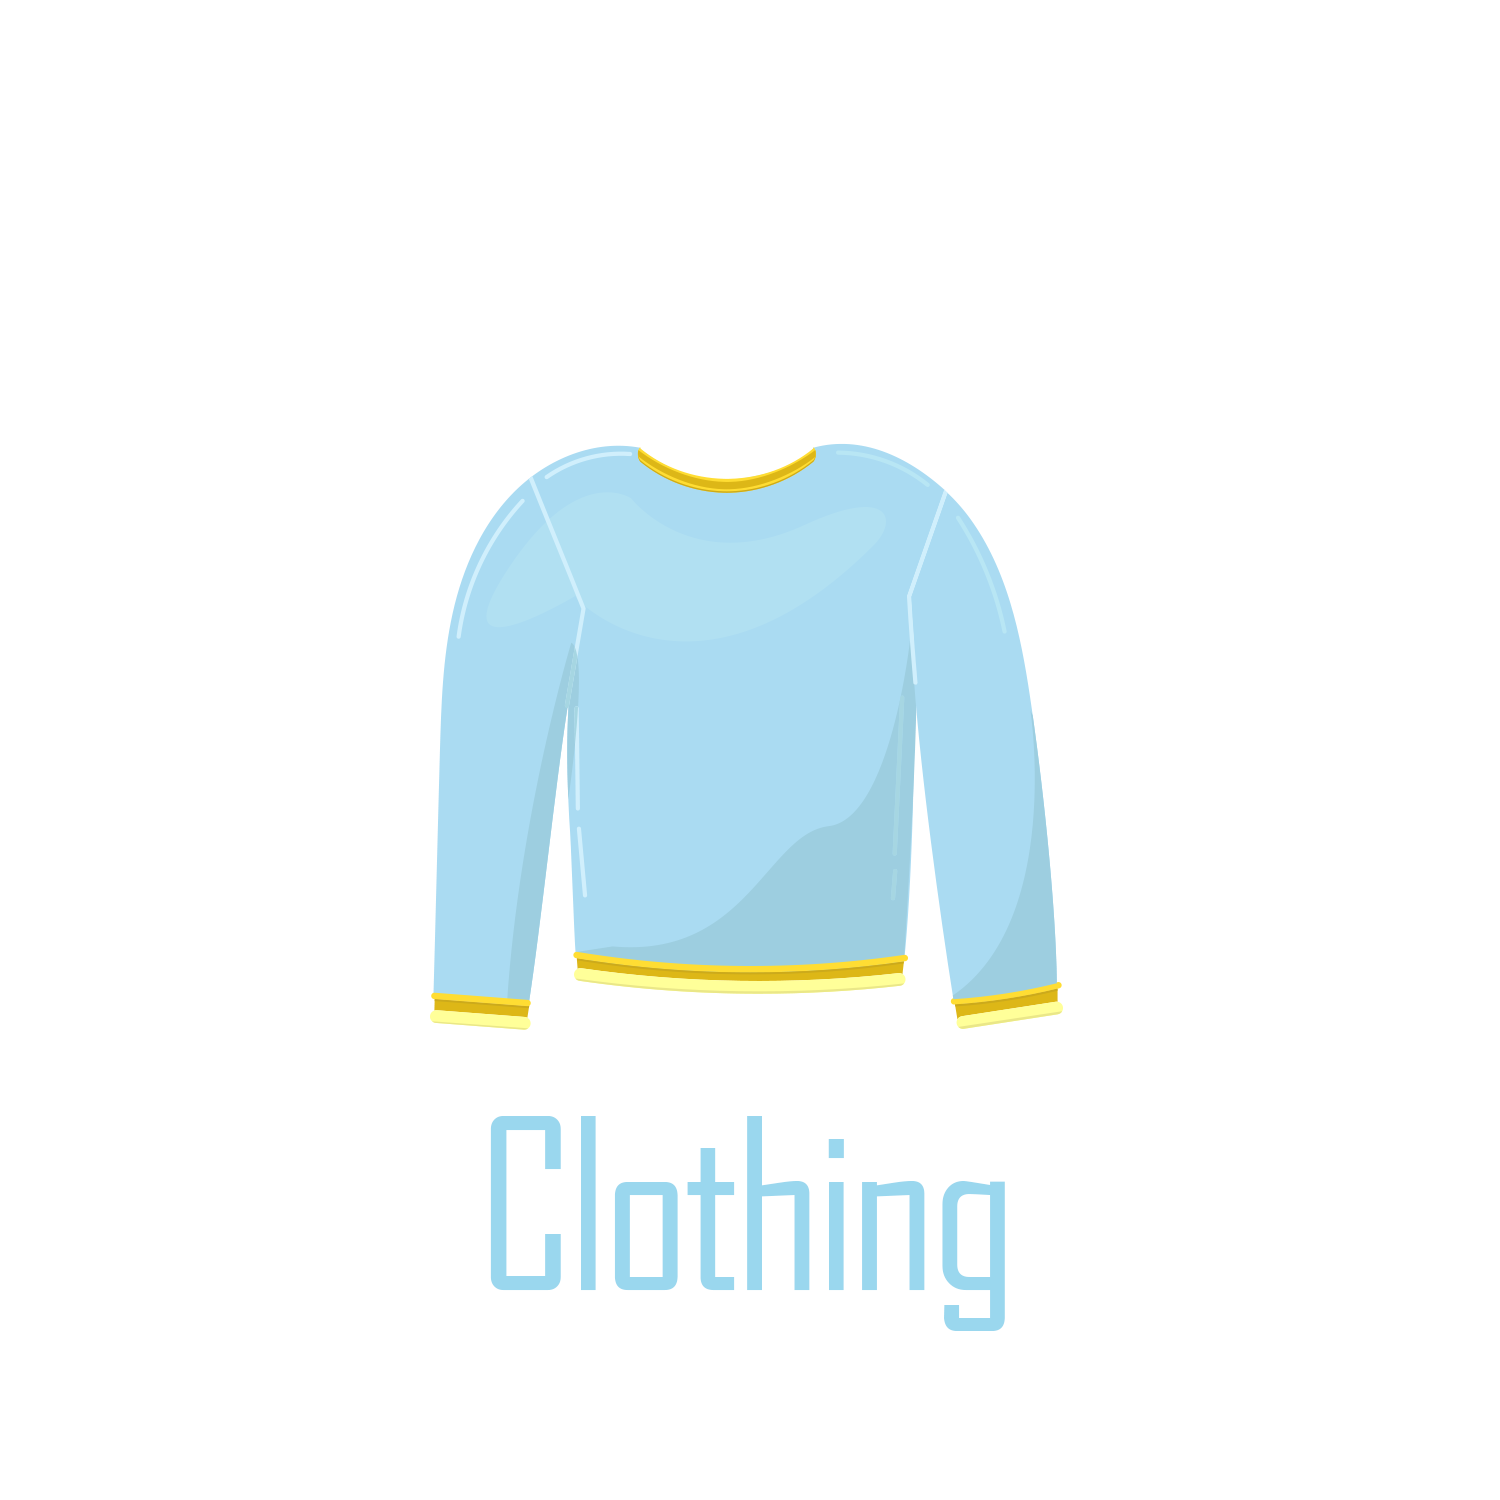 Clothing Record Book Icon